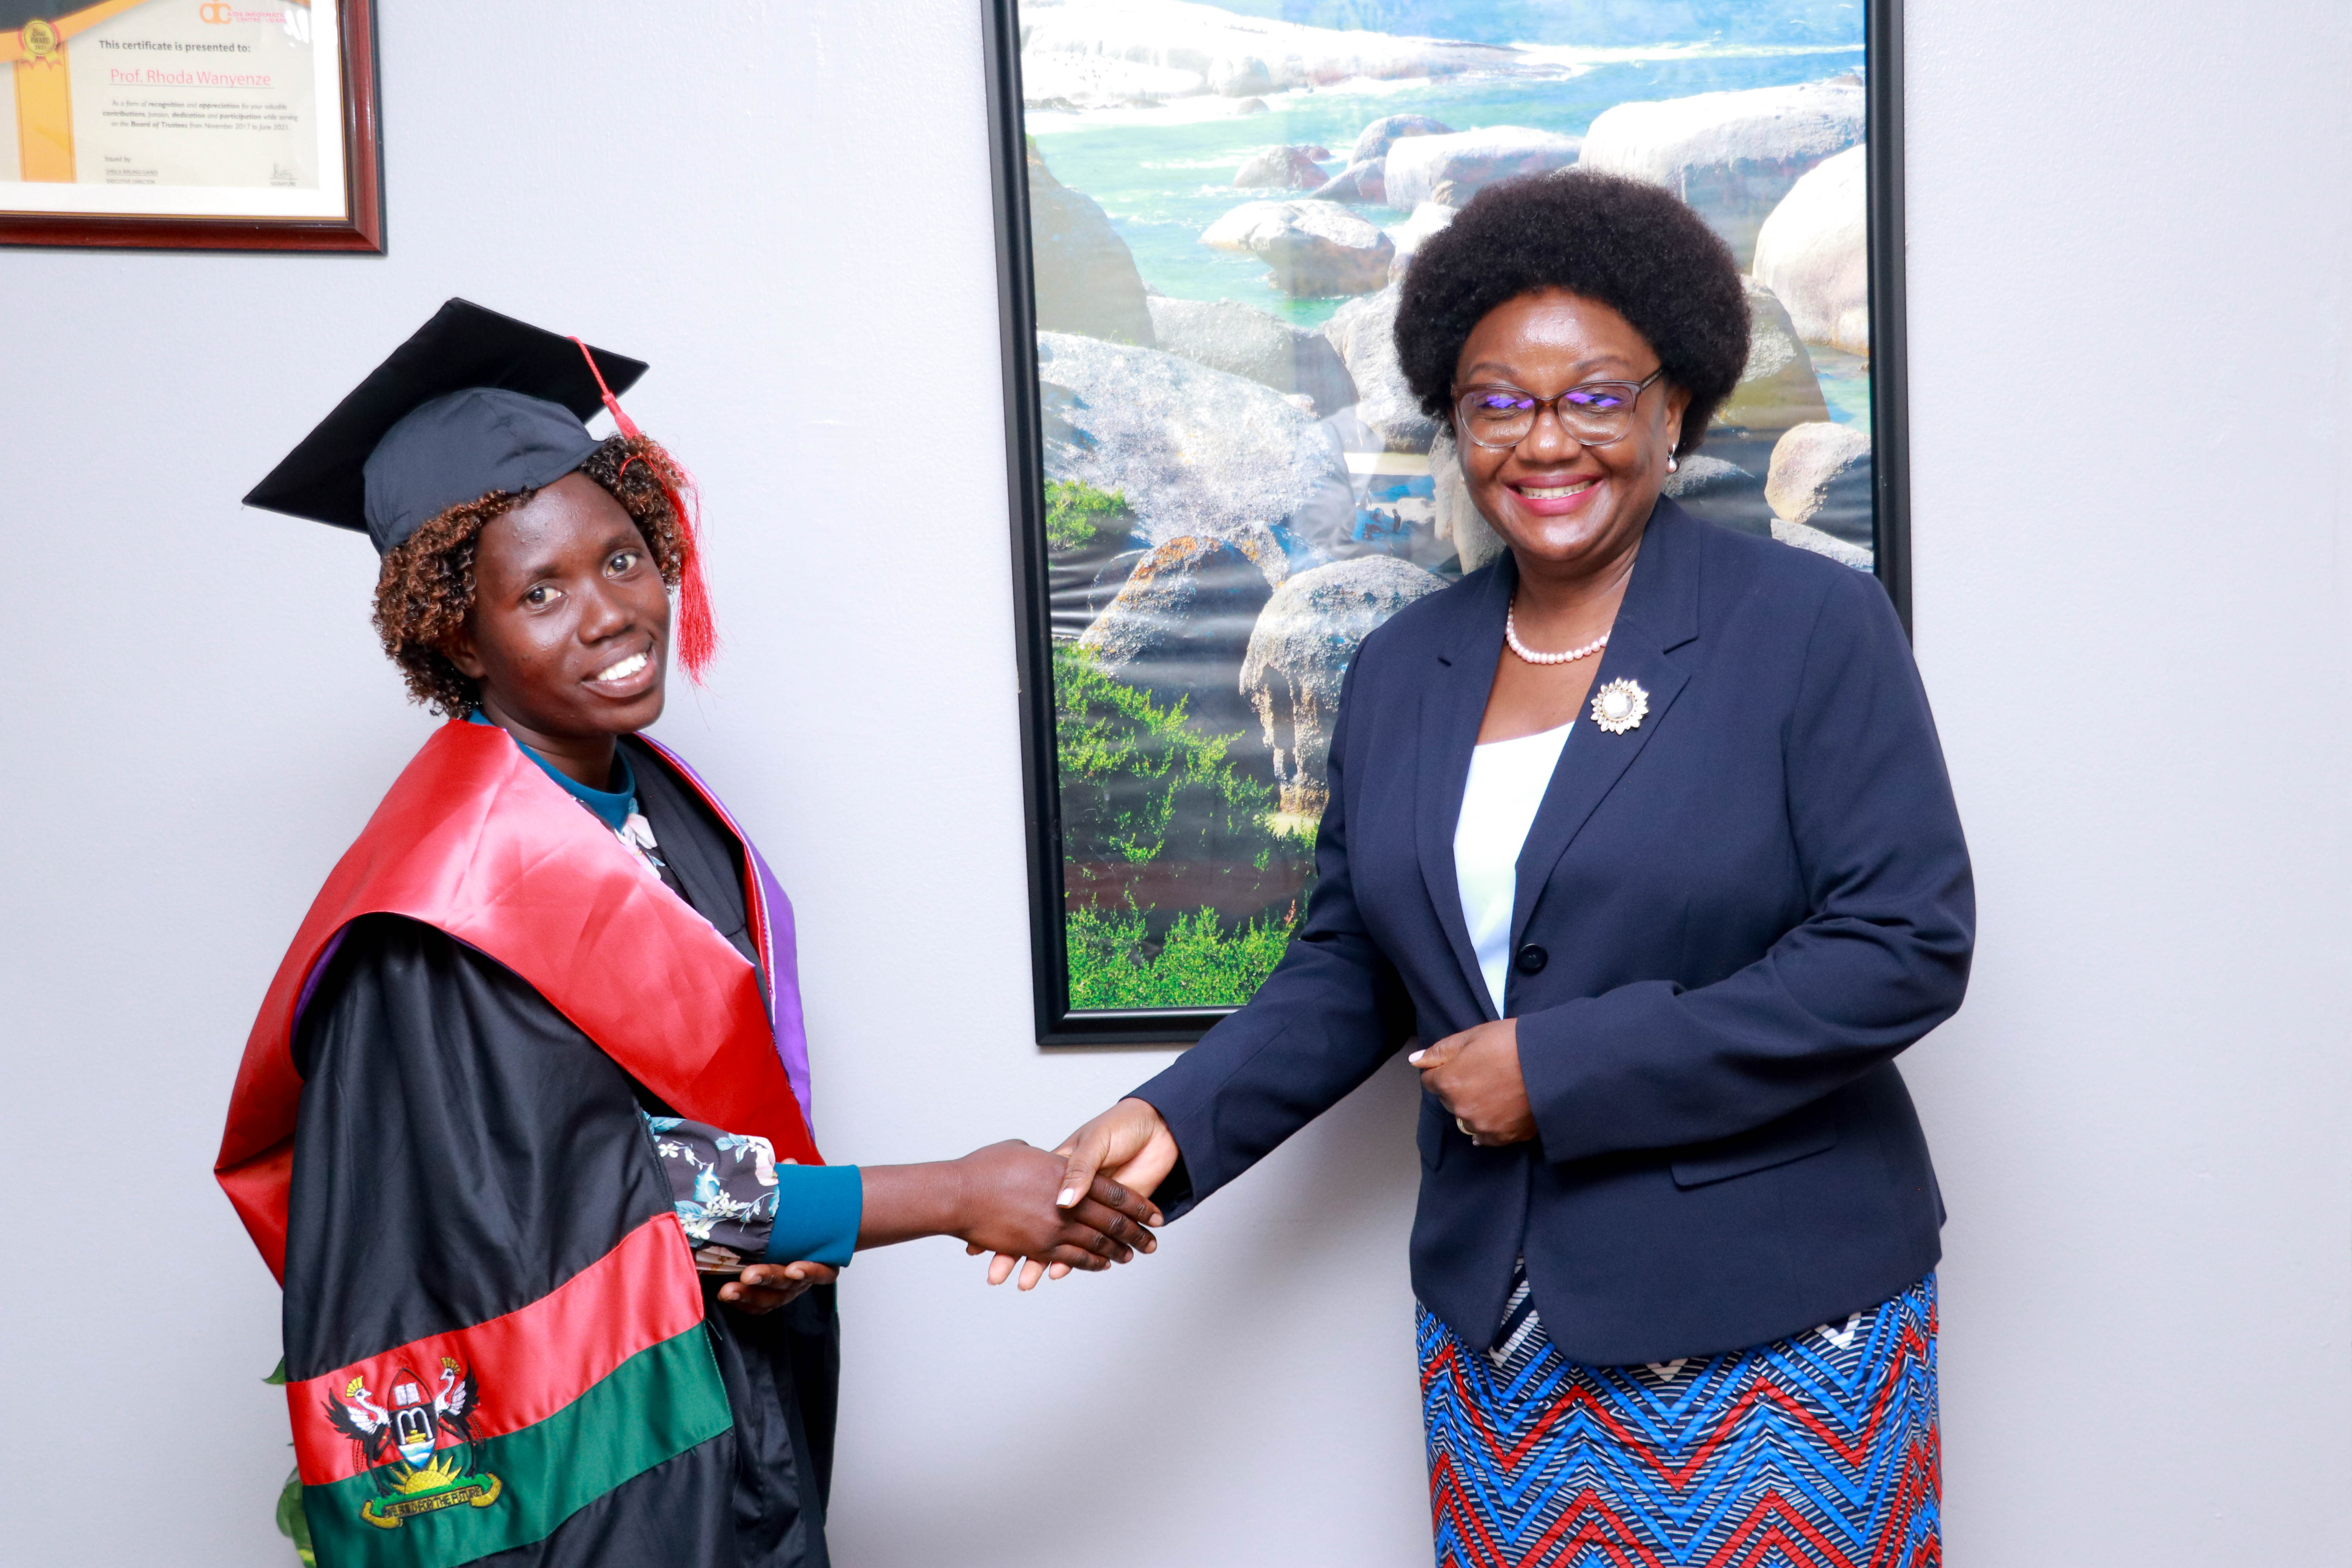 Dr. Rhoda Wanyenze, MBChB, MPH, PhD, is a Professor and Dean of Makerere University School of Public Health (MakSPH) congrates Ms. Audo Tabitha